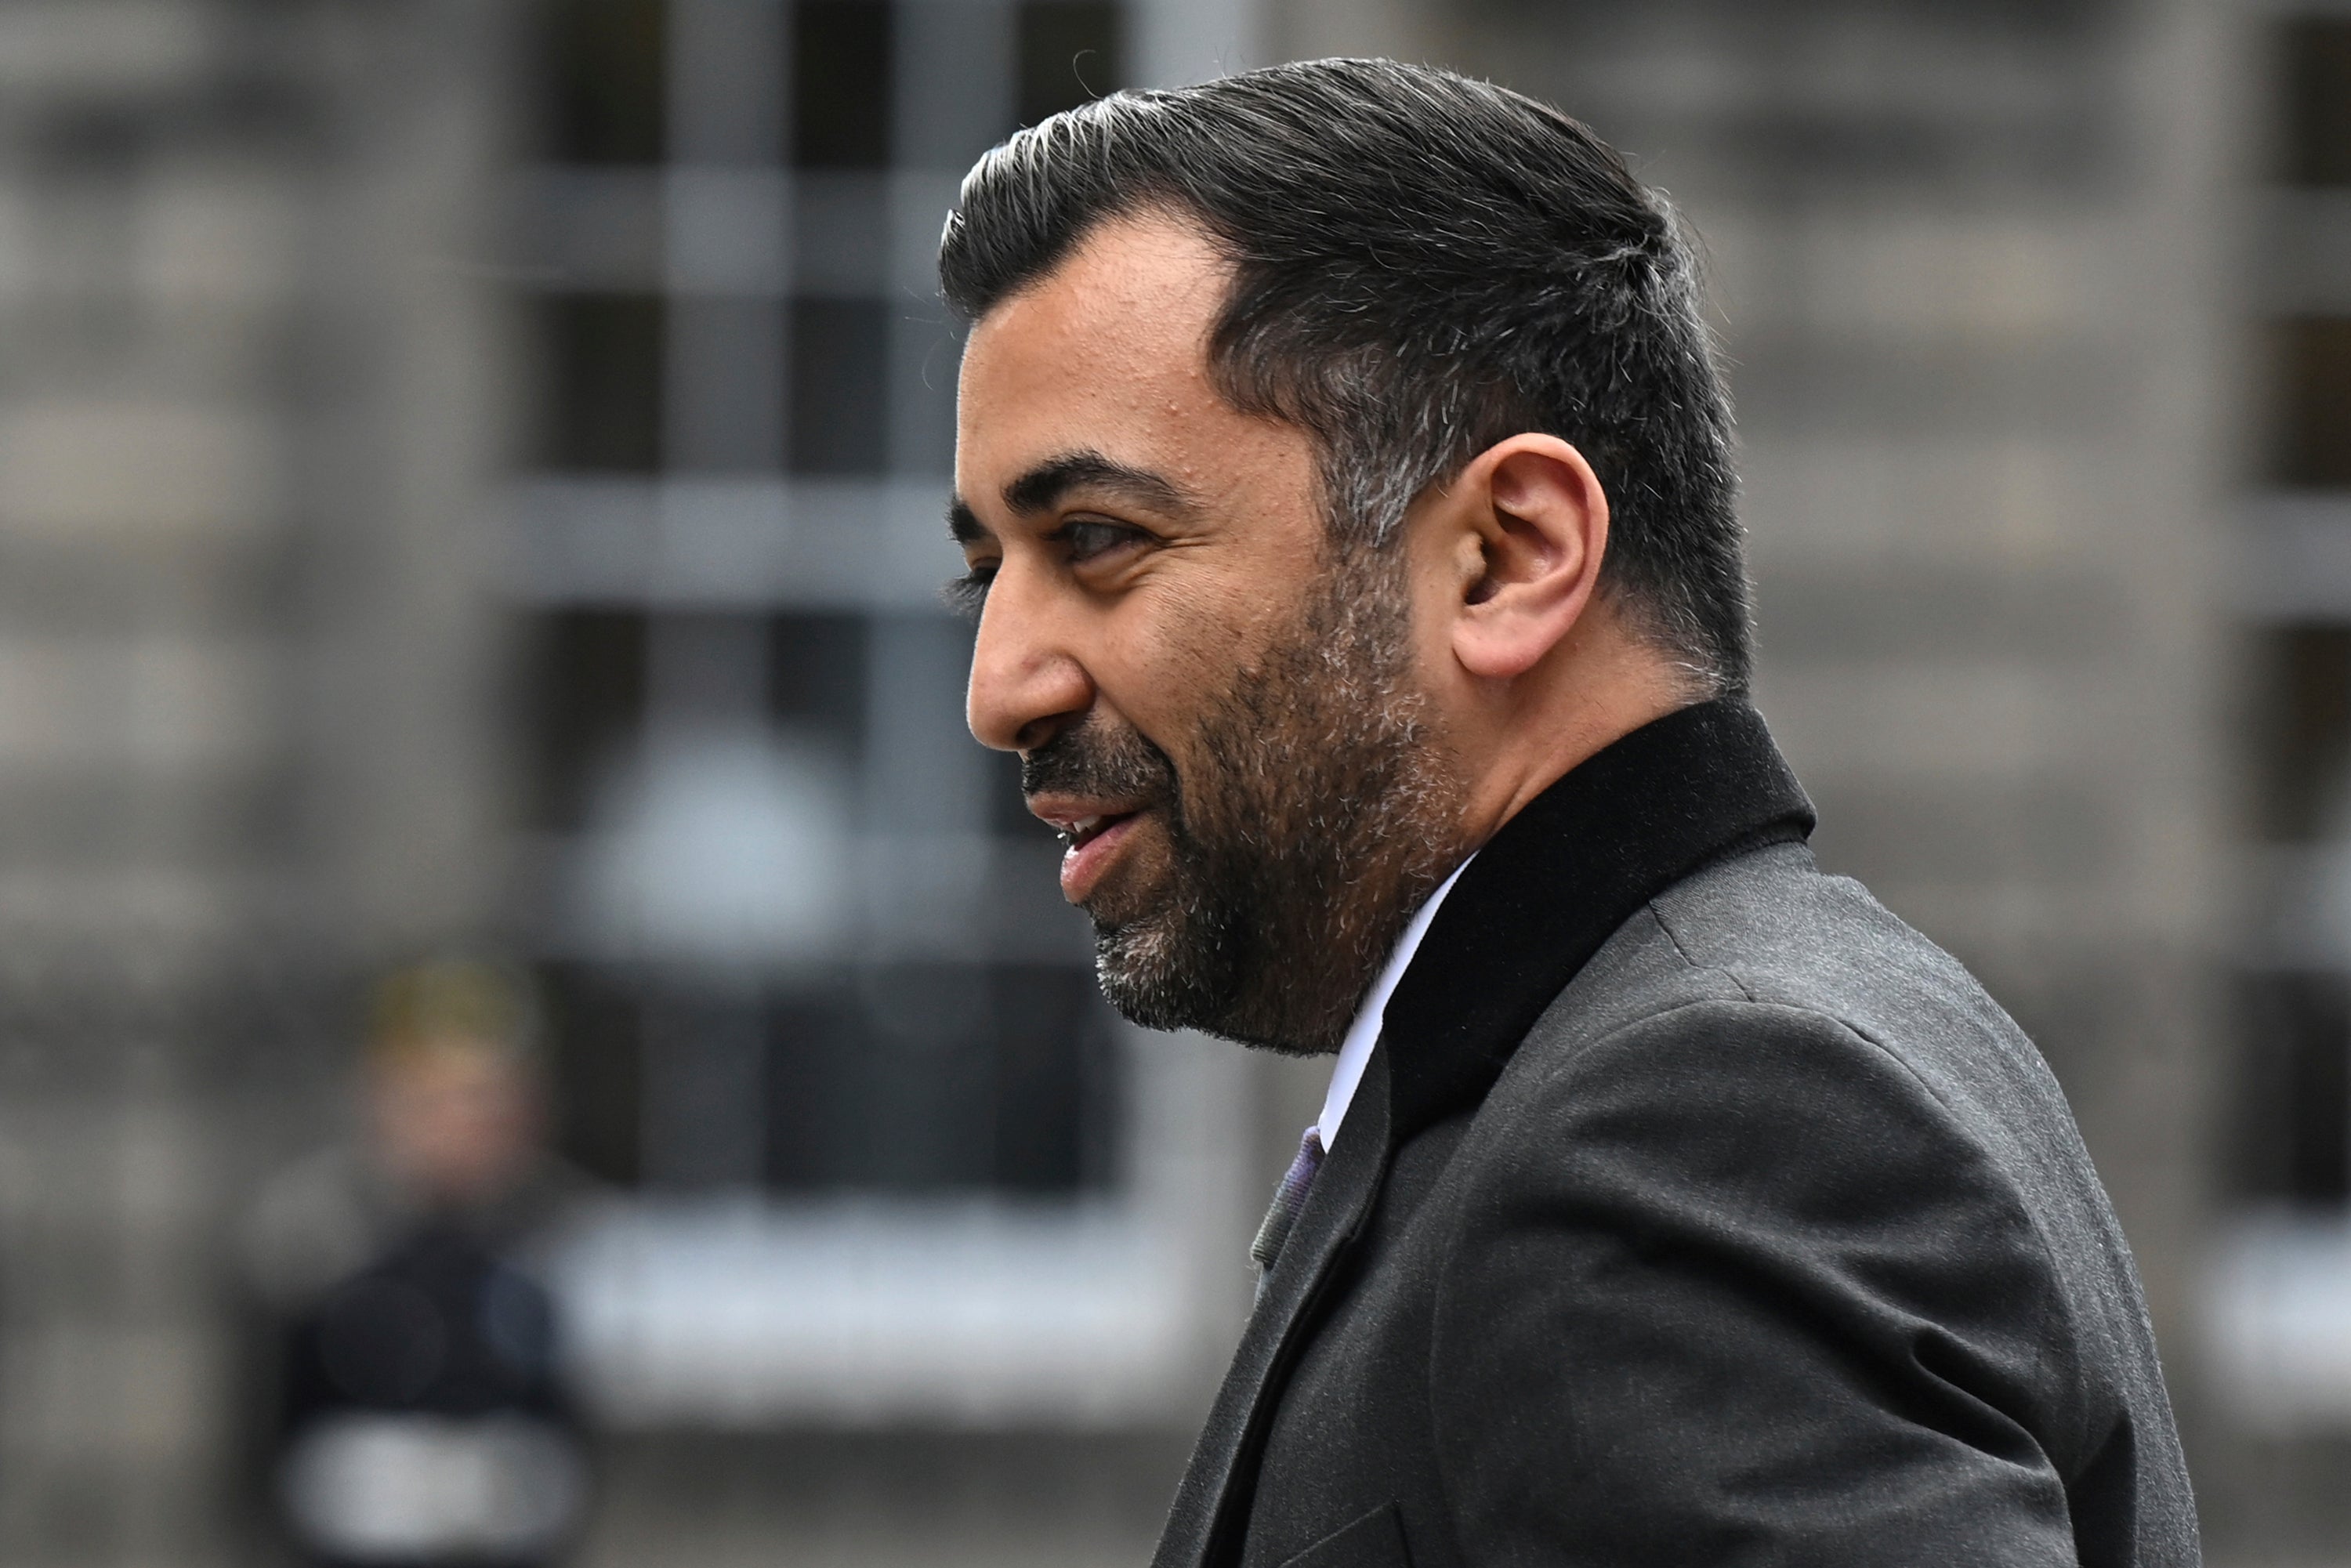 Humza Yousaf fought back tears as he quit as first minister